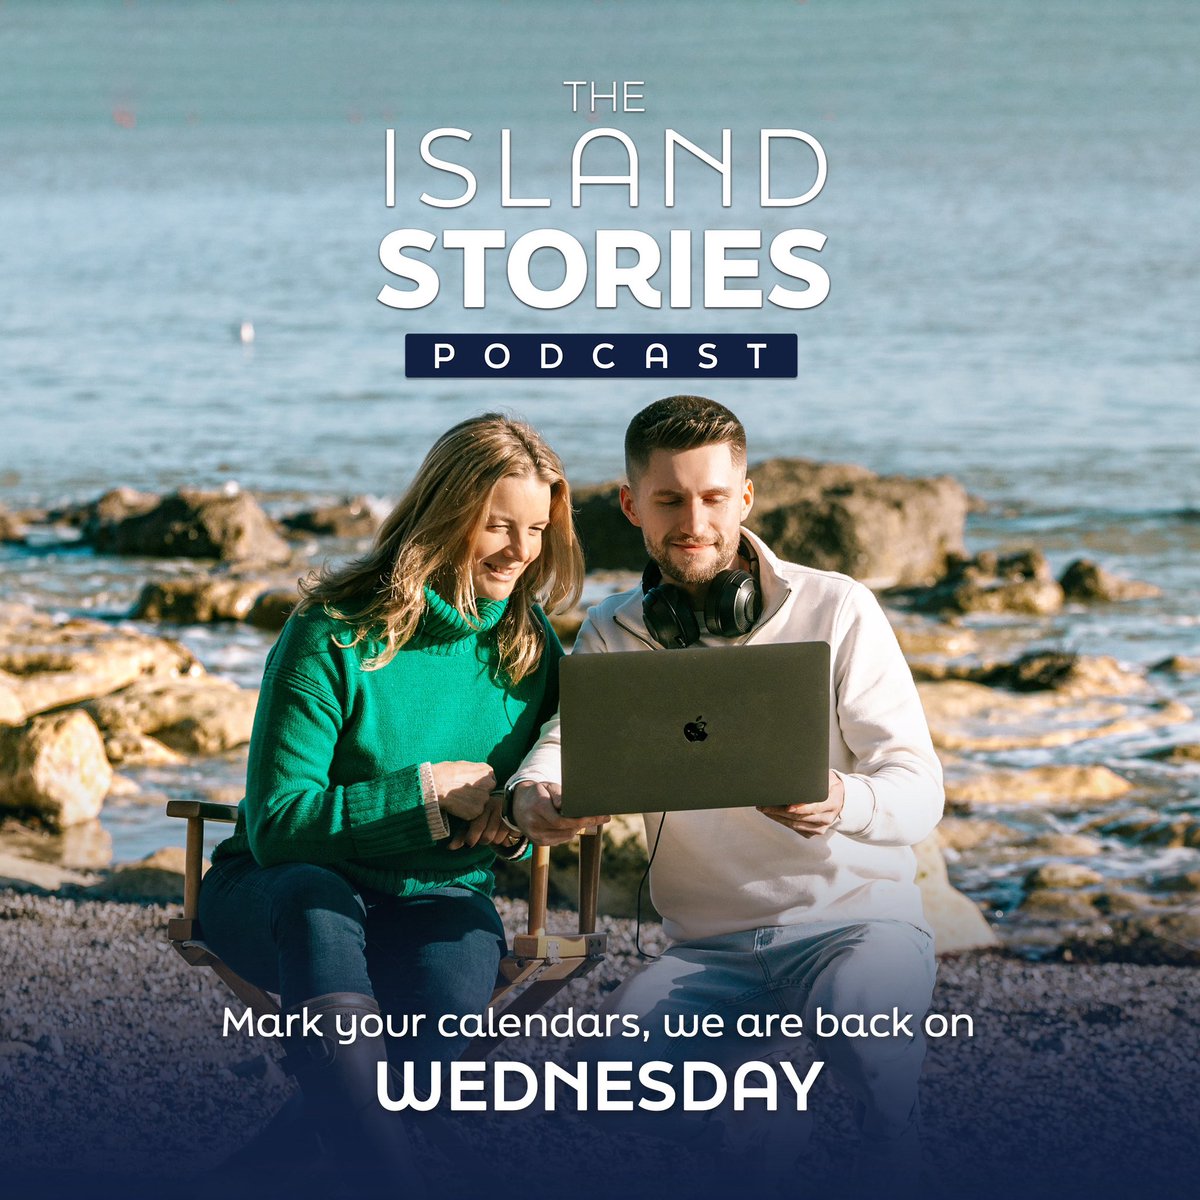 The countdown has begun ⏰ Season 3 launches on Wednesday and we’ve got a bunch of amazing islanders ready to tell you their stories! Make sure to set a reminder, you won’t want to miss out 🙌 #isleofwight #isleofwightlife #islandstoriespodcast #islandlife